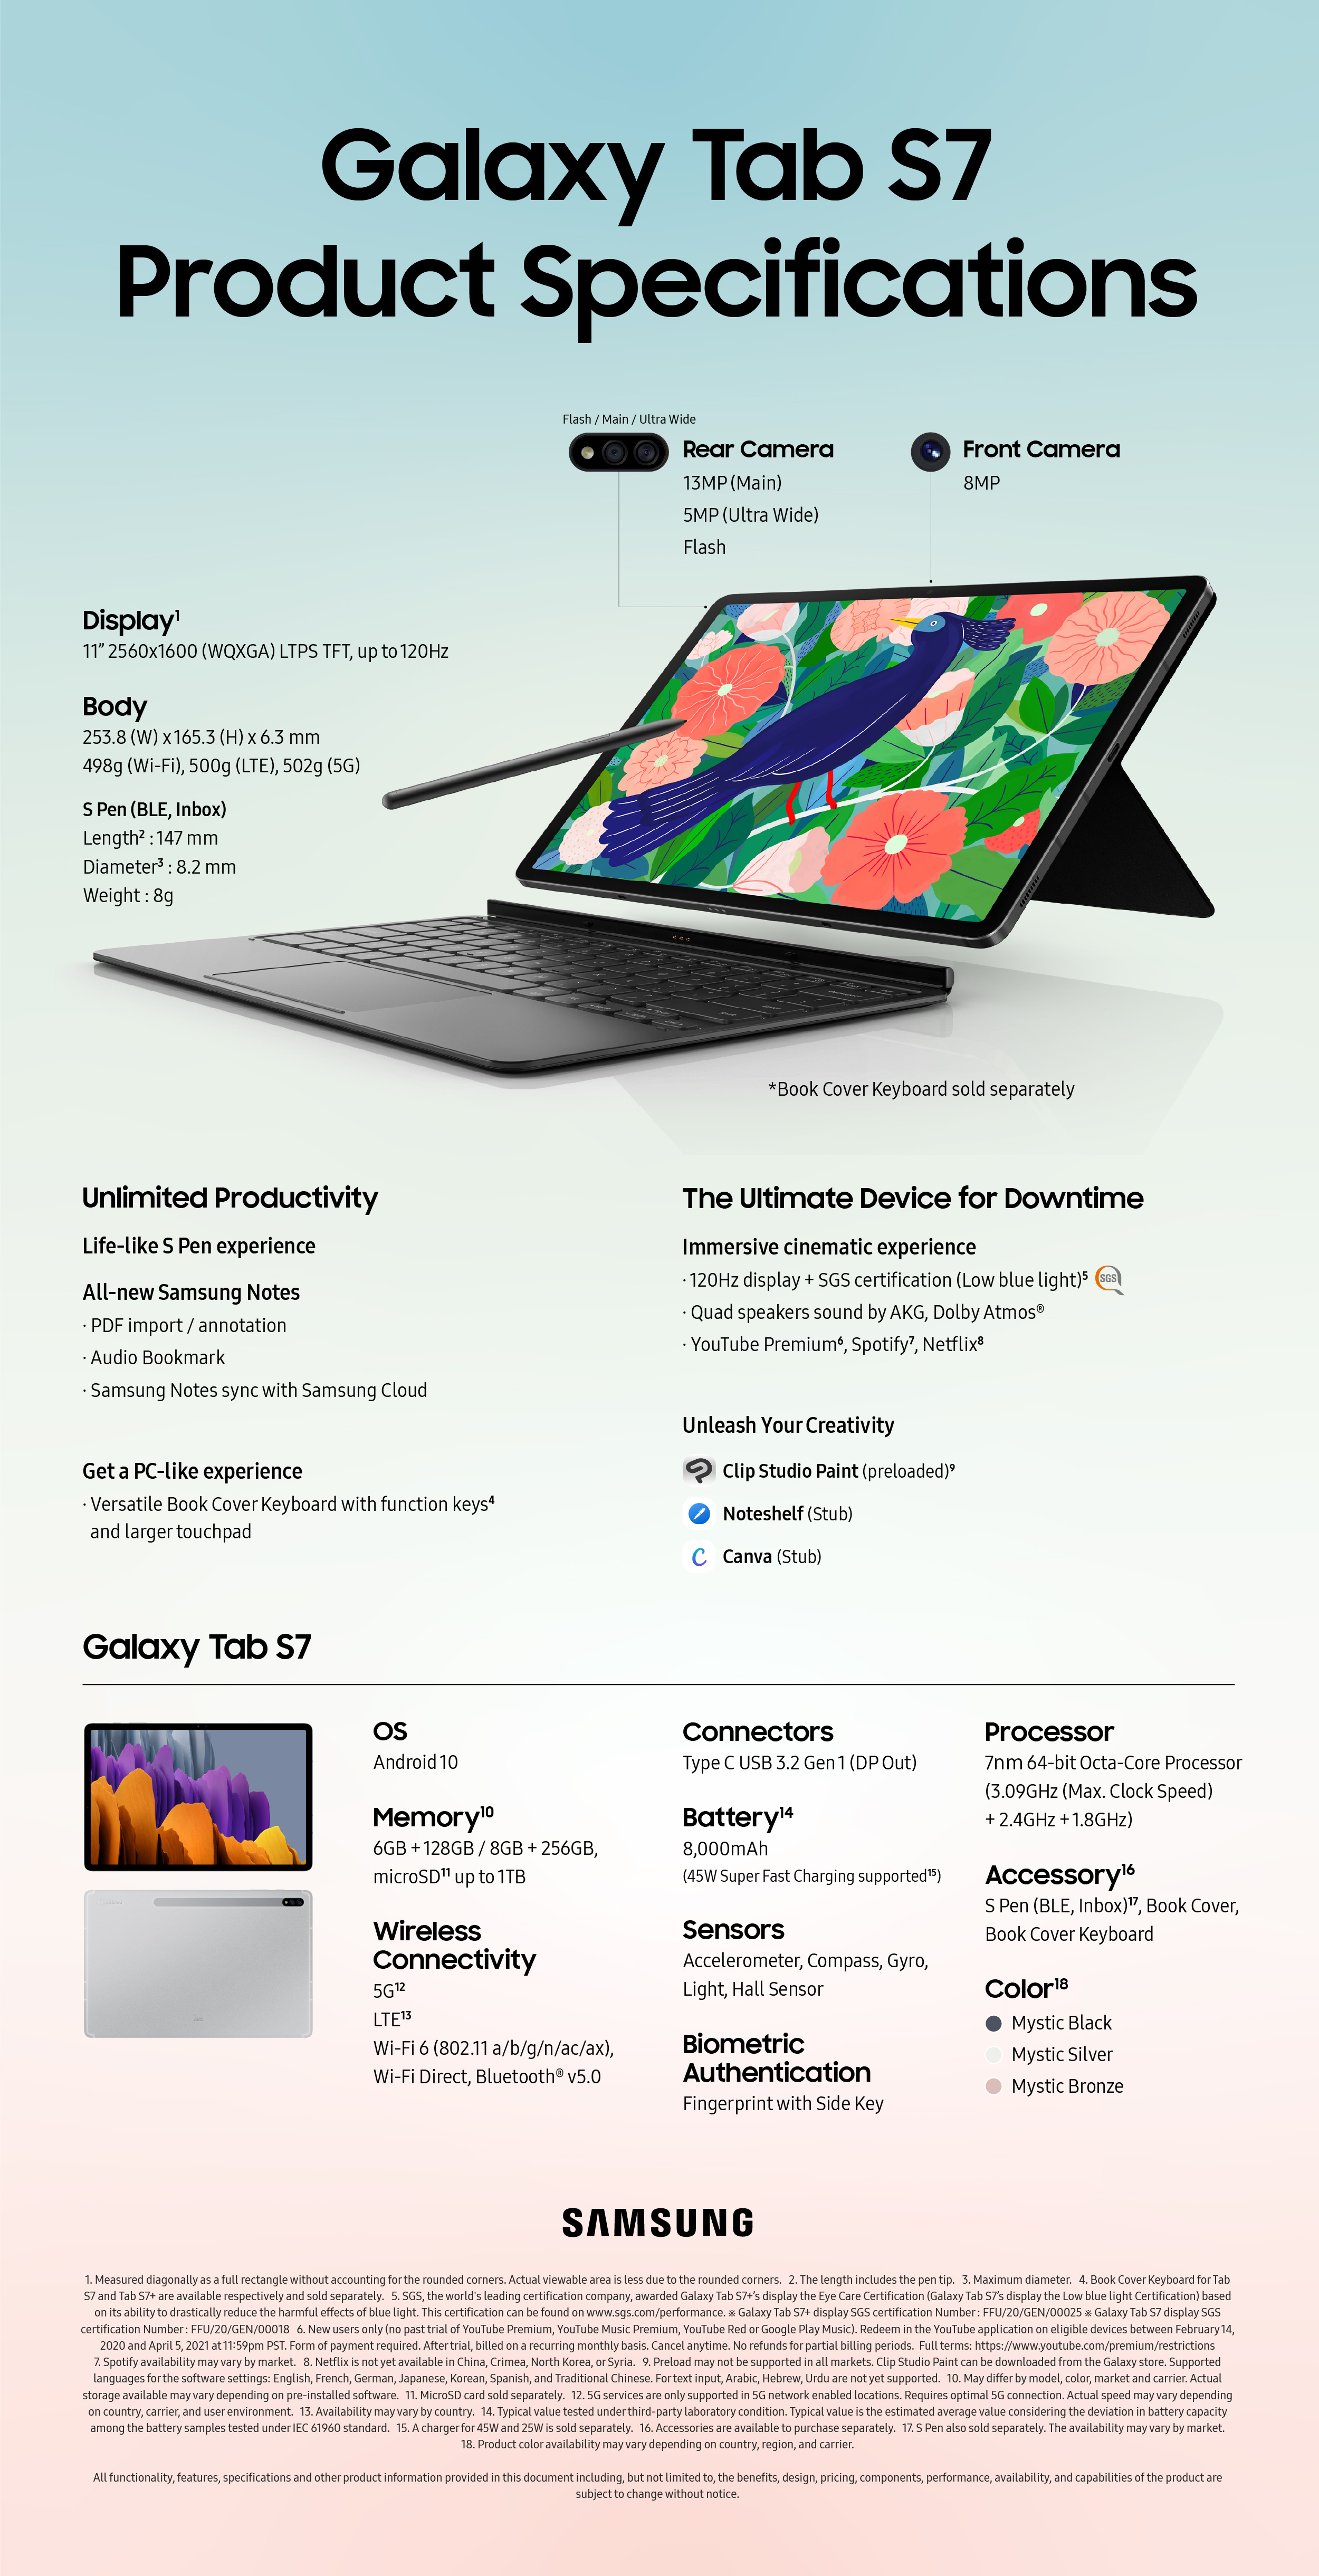 galaxytabs7_product_specifications_final.jpg